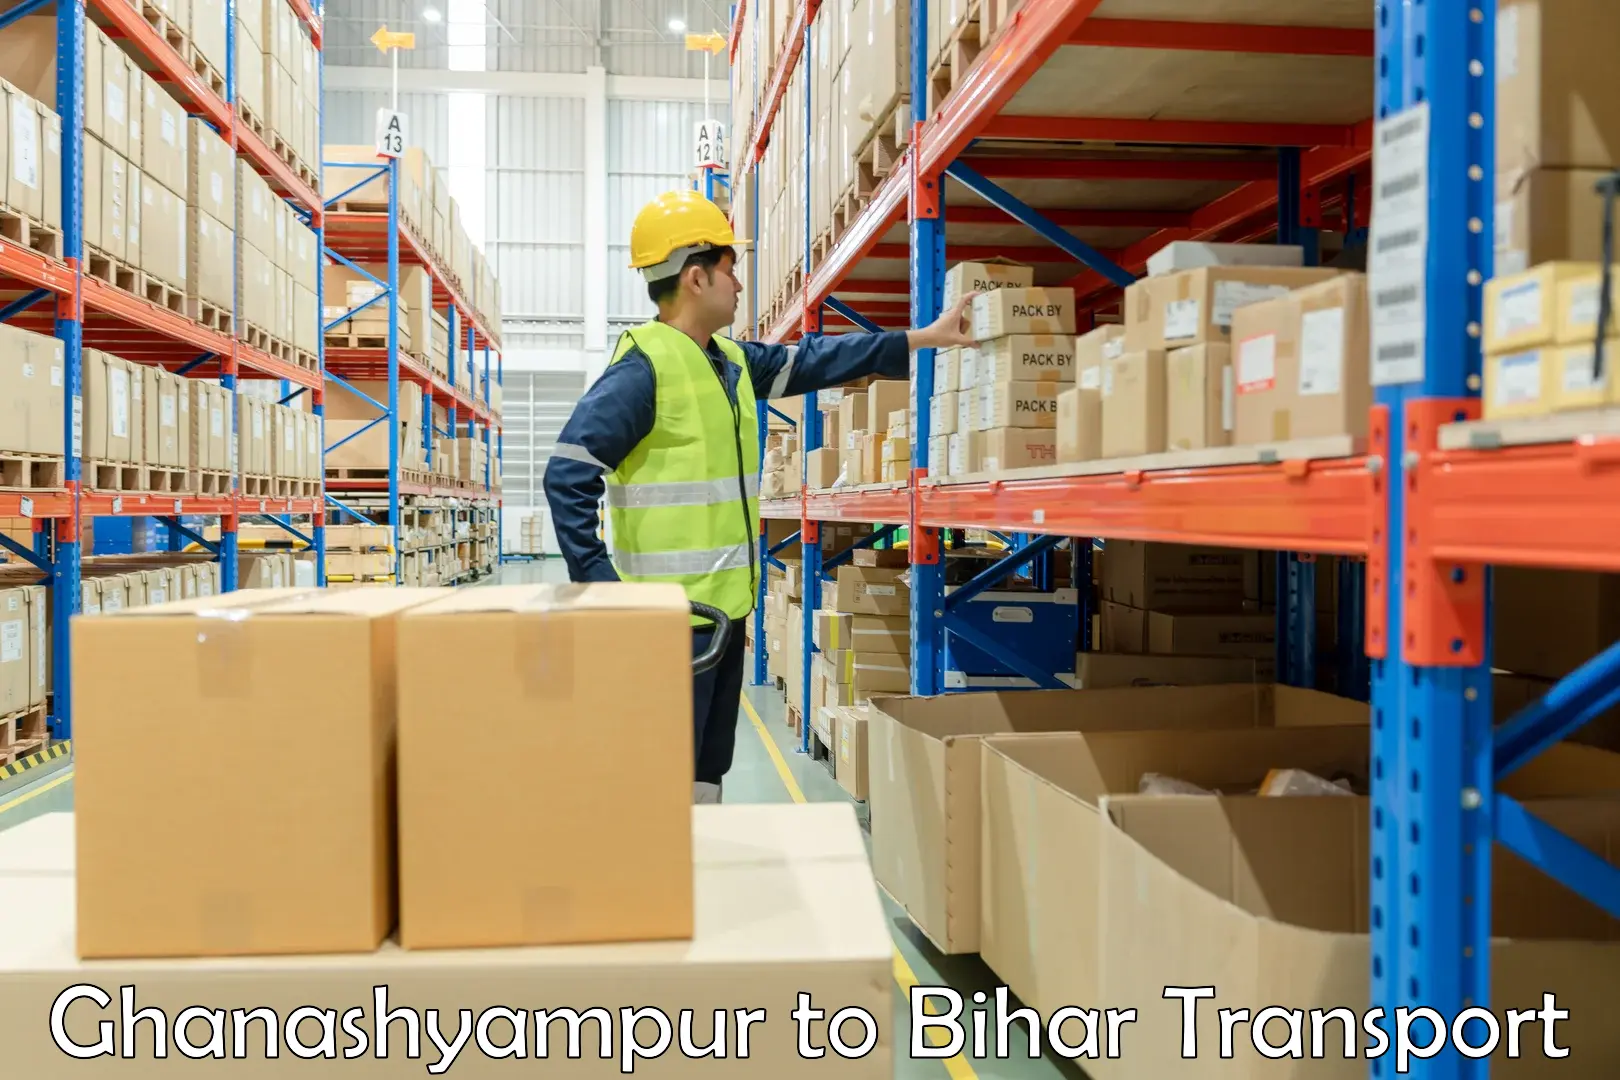 Parcel transport services in Ghanashyampur to Patna